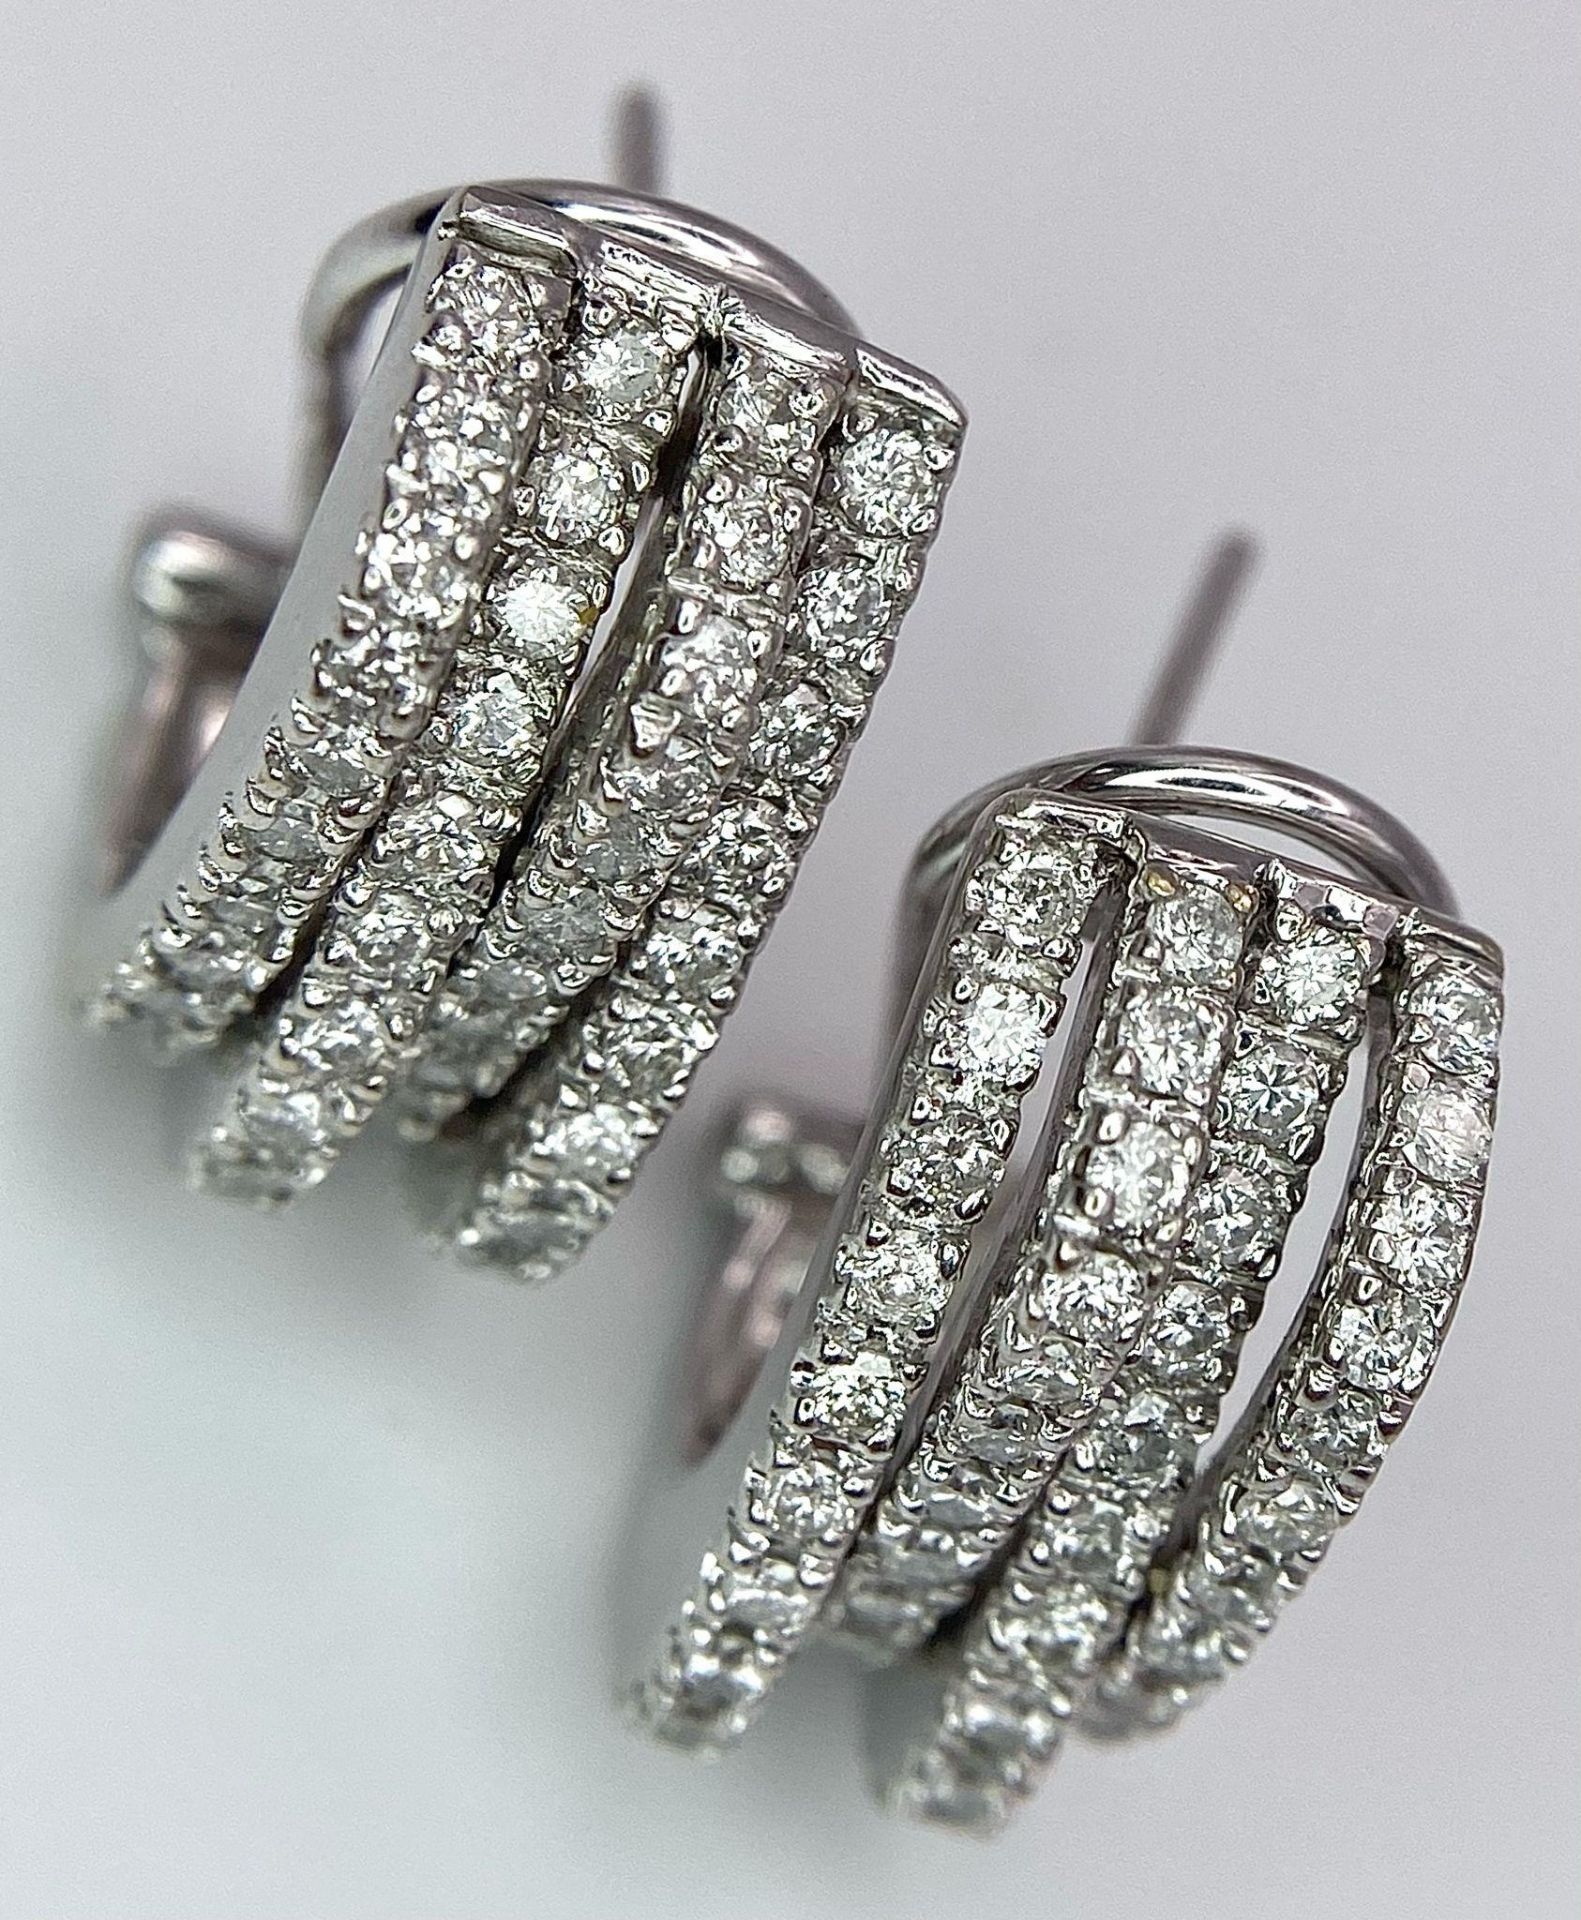 A PAIR OF 18K WHITE GOLD DIAMOND EARRINGS. TOTAL WEIGHT 9.8G - Image 3 of 9